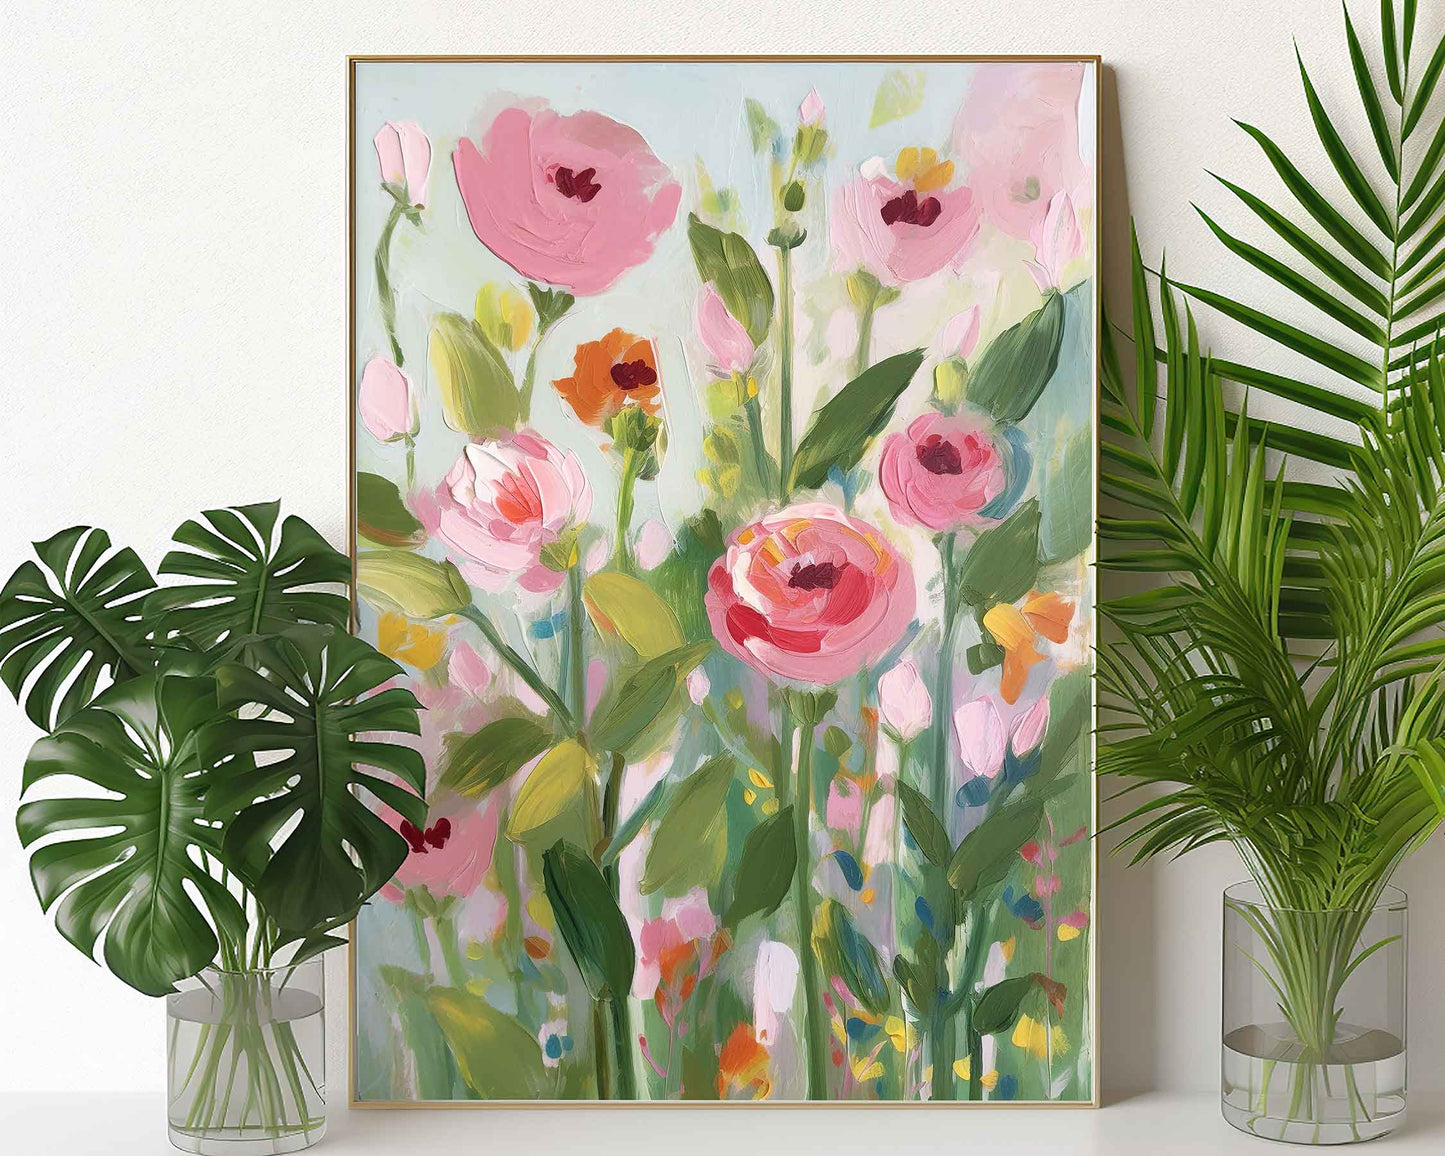 Framed Image of Pink Flowers Vintage Abstract Oil Paintings Wall Art Poster Print Gift